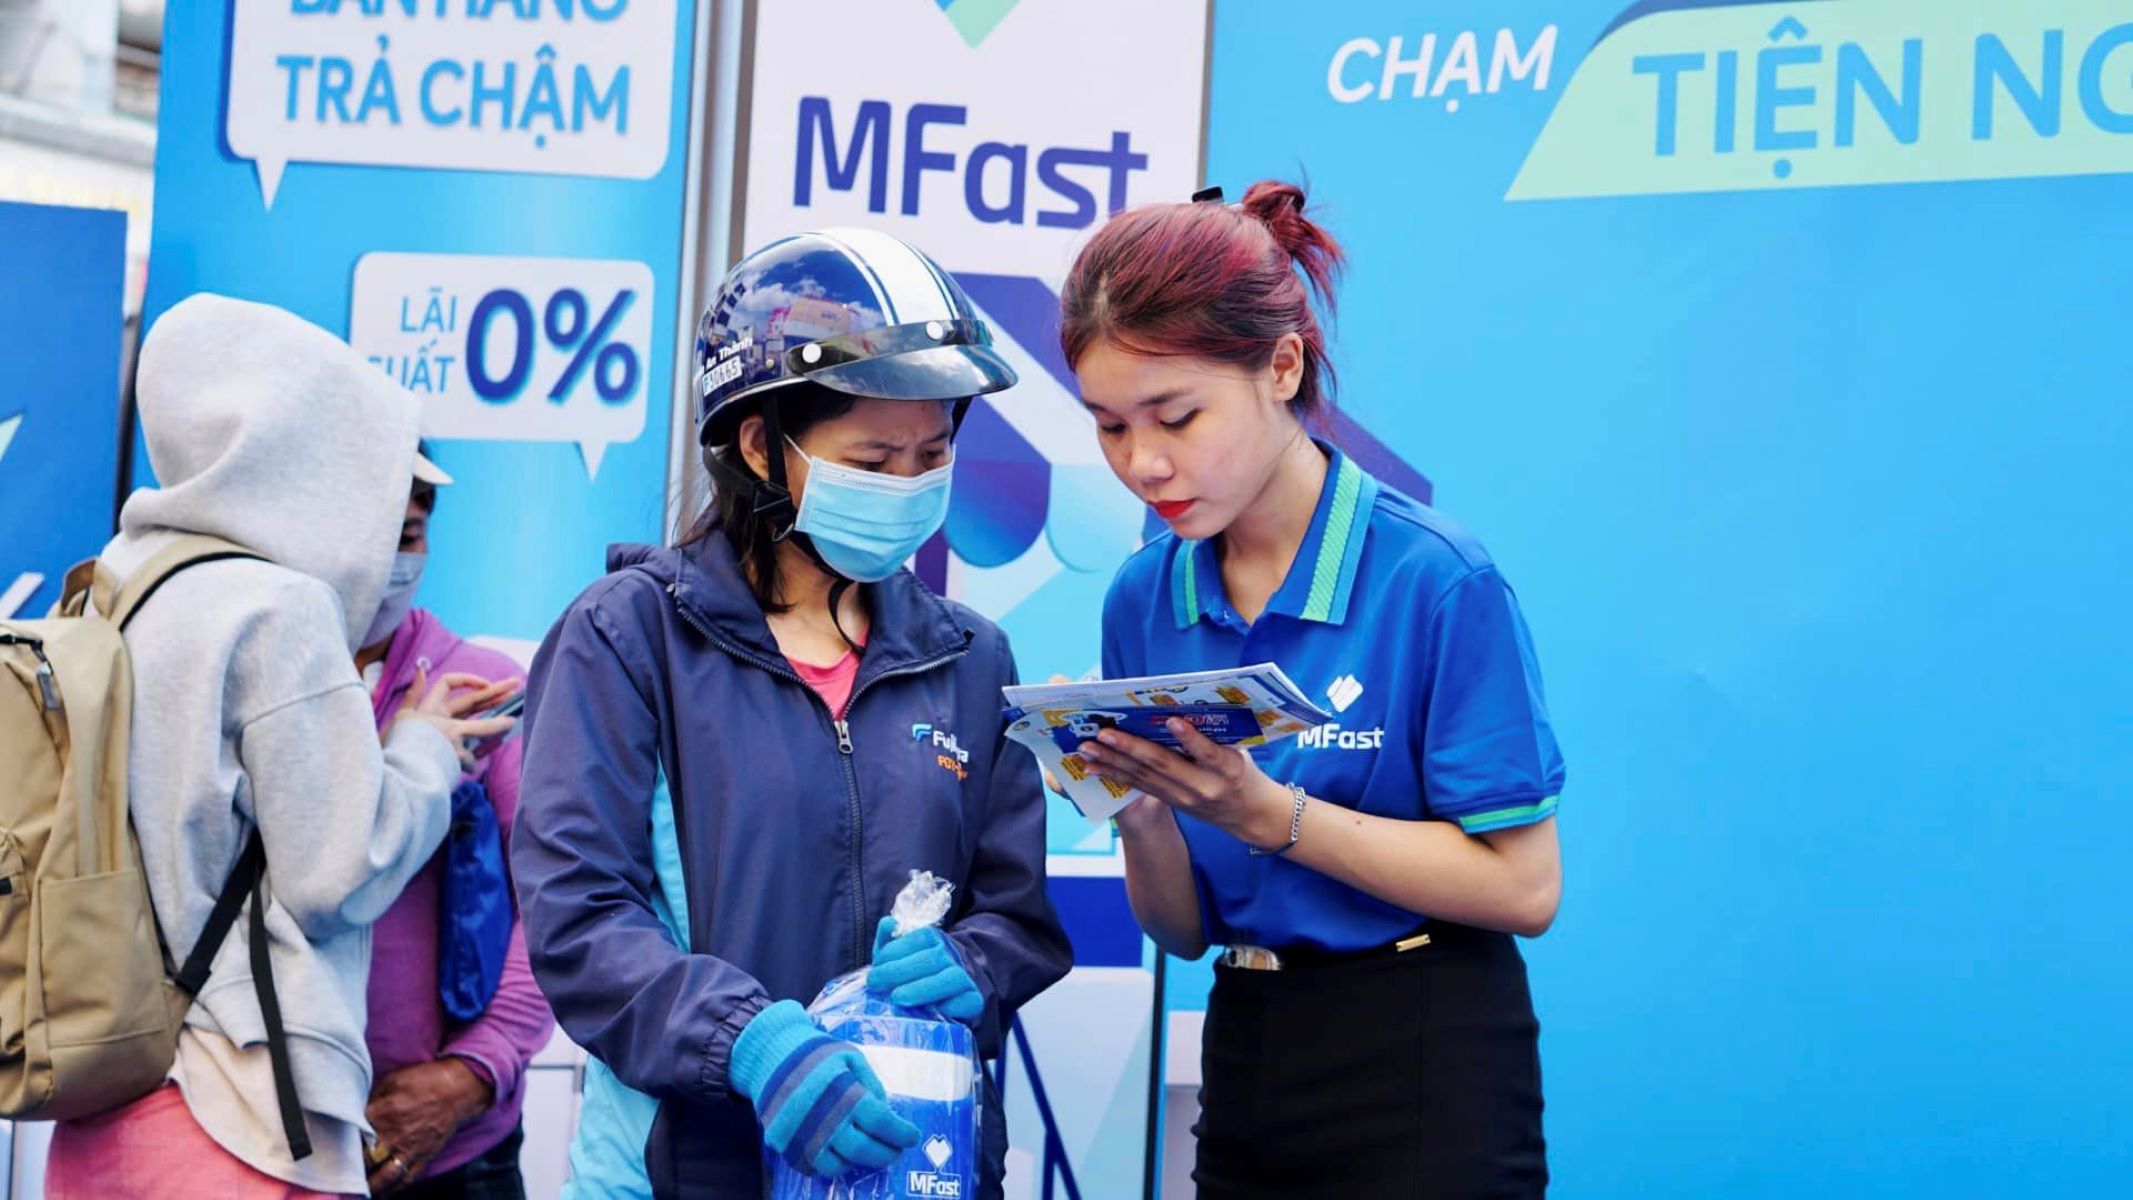 MFast Raises $6 Million In Series A Funding To Expand Financial Services Access In Vietnam